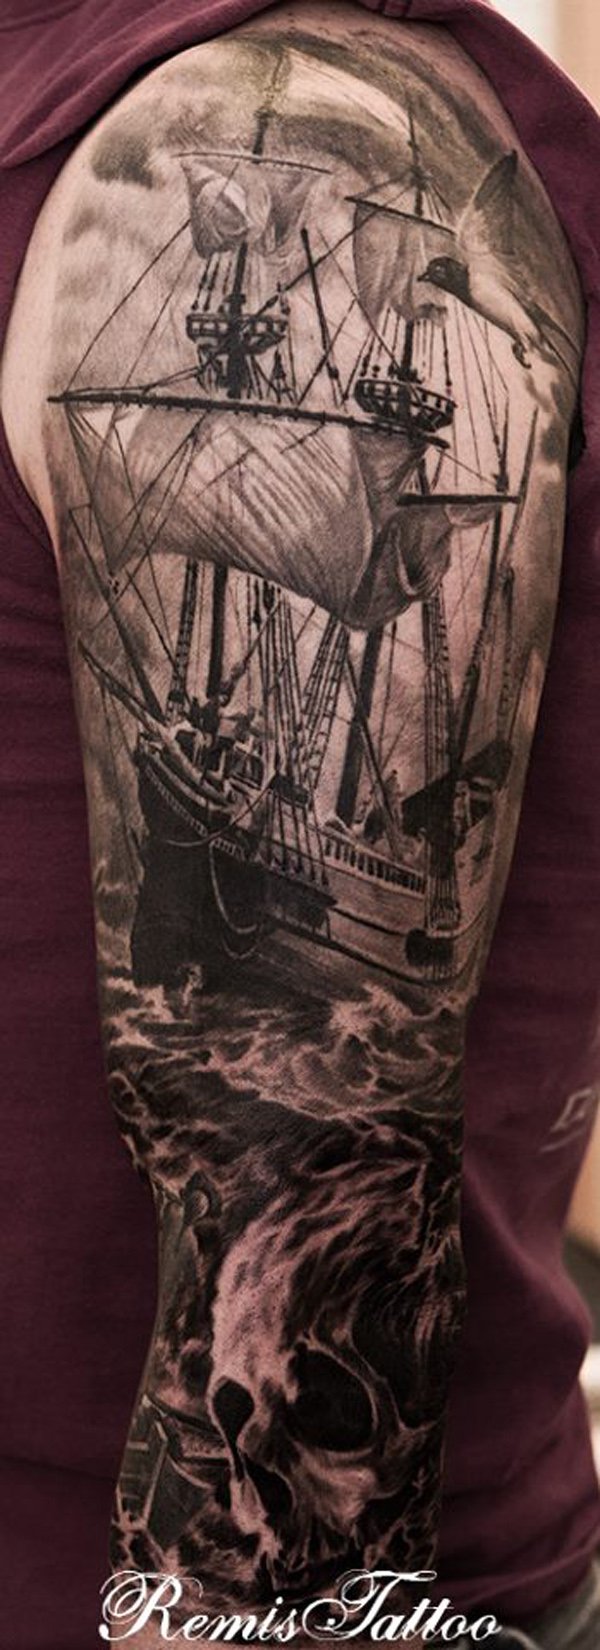 Wonderful Black And Grey Pirate Ship With Skull Tattoo On Man Left Full Sleeve By Remis